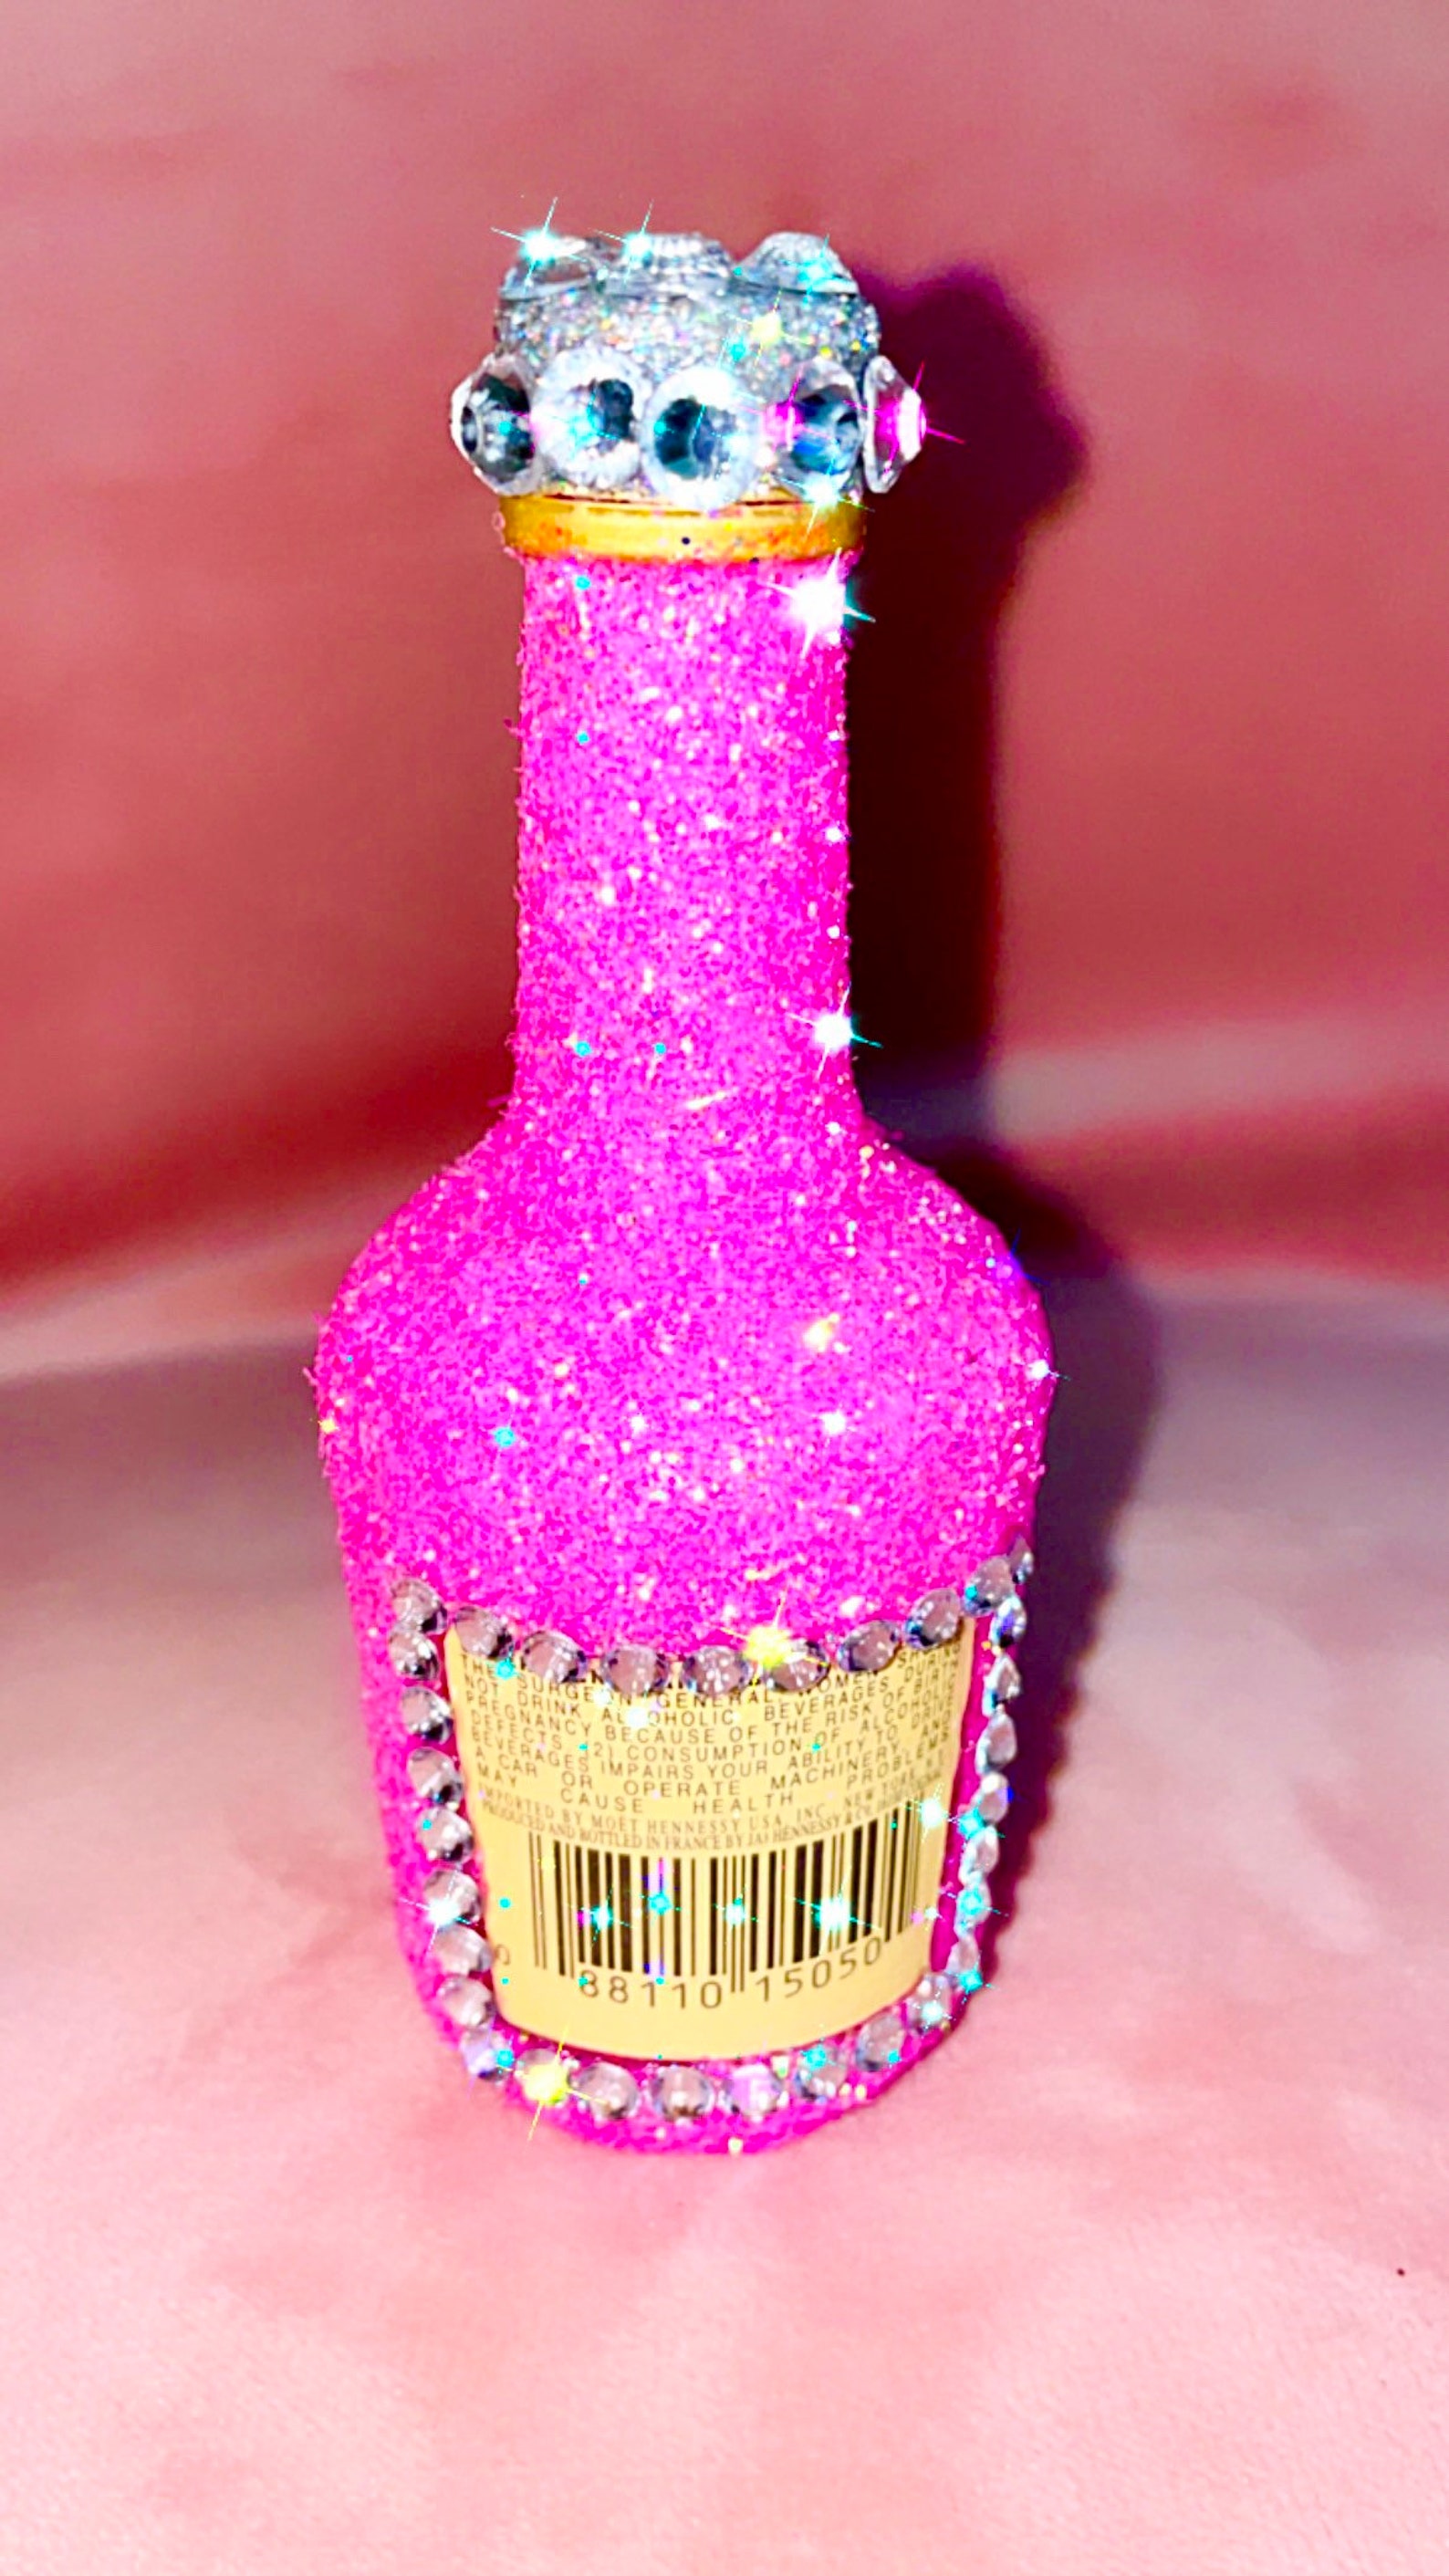 Henny Bedazzled Mini Bottle Each Sold Separately With One Etsy